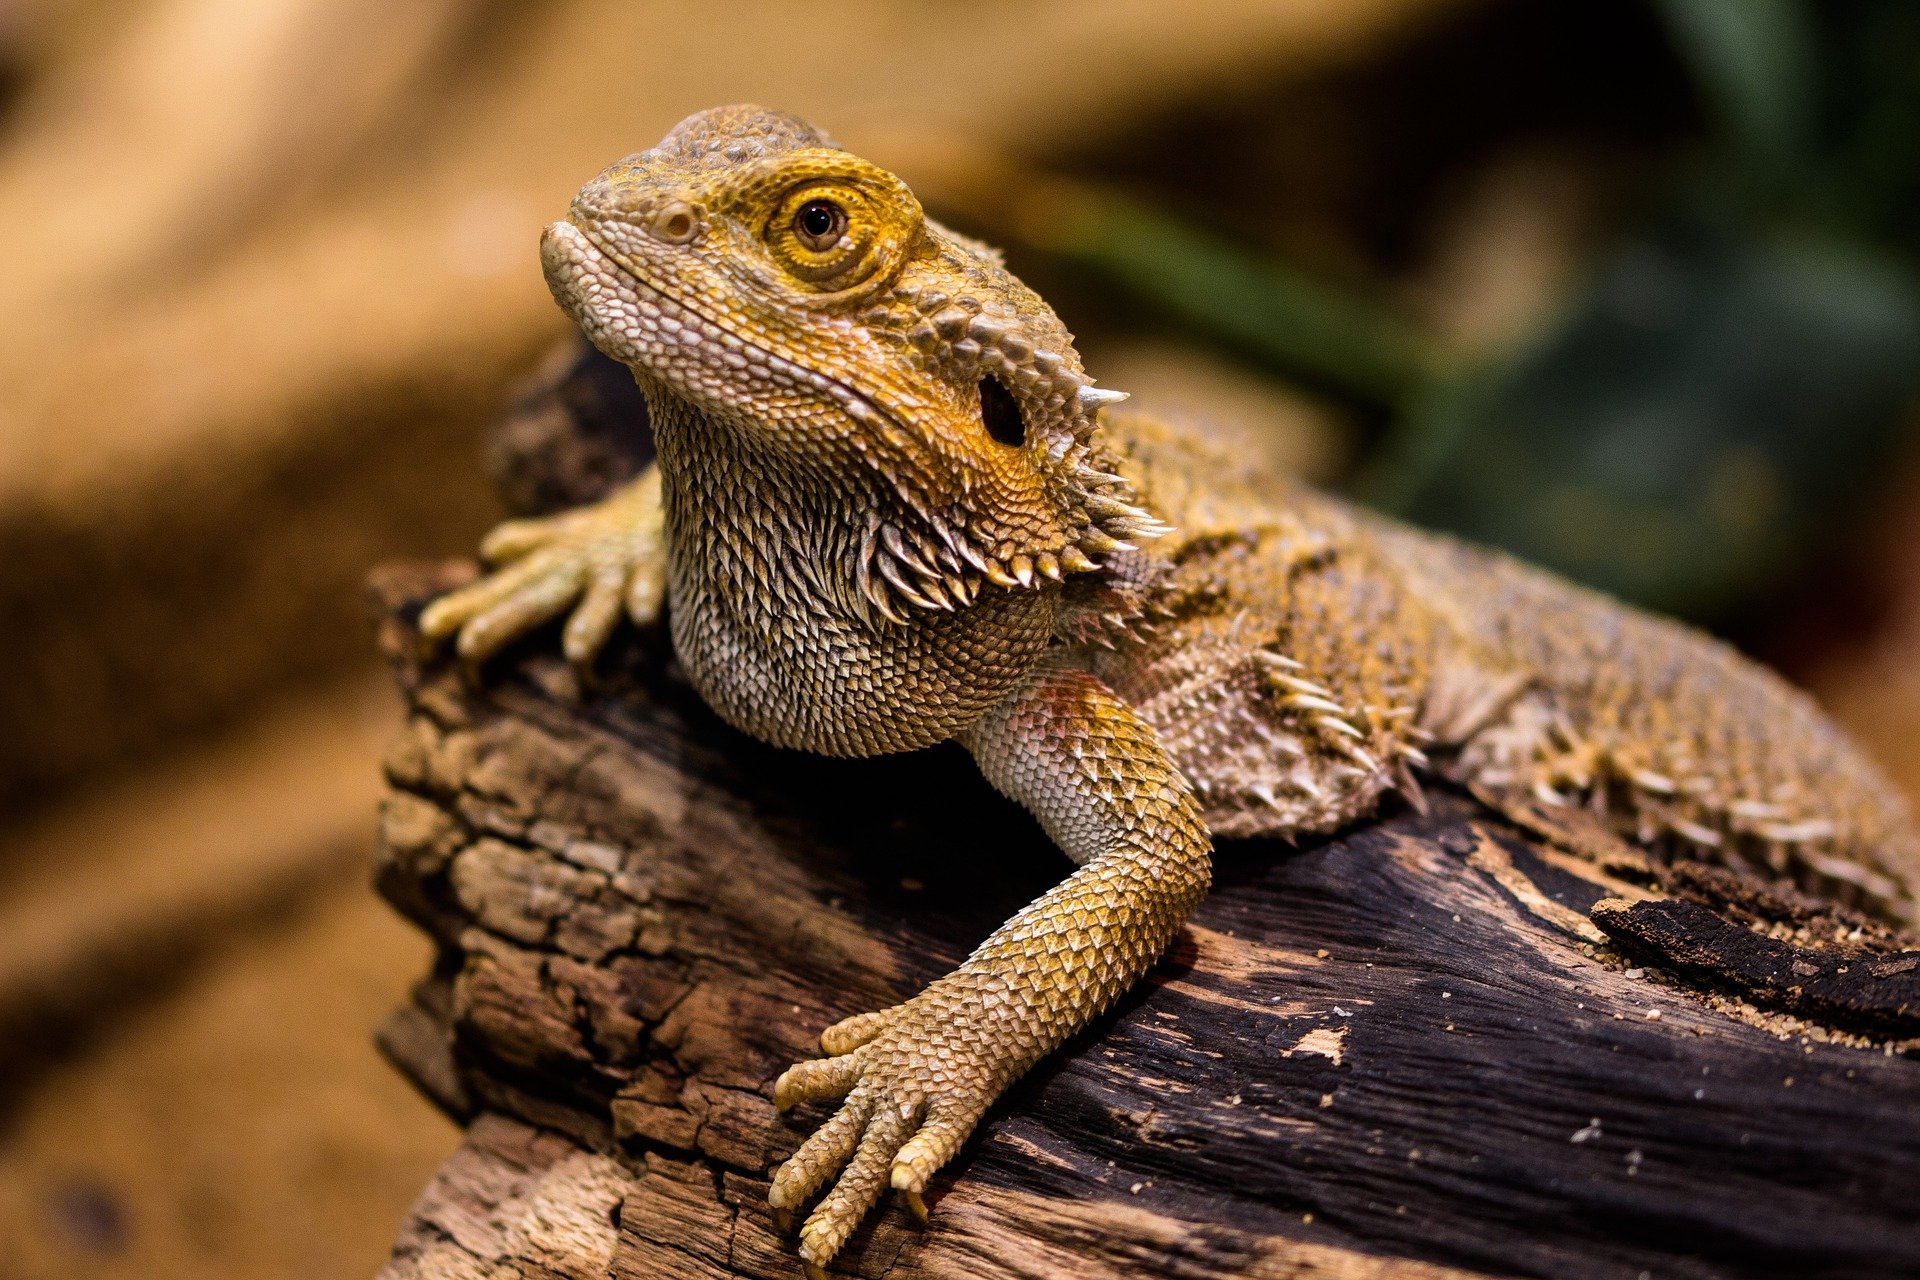 Bearded dragon sitting on a piece of wood